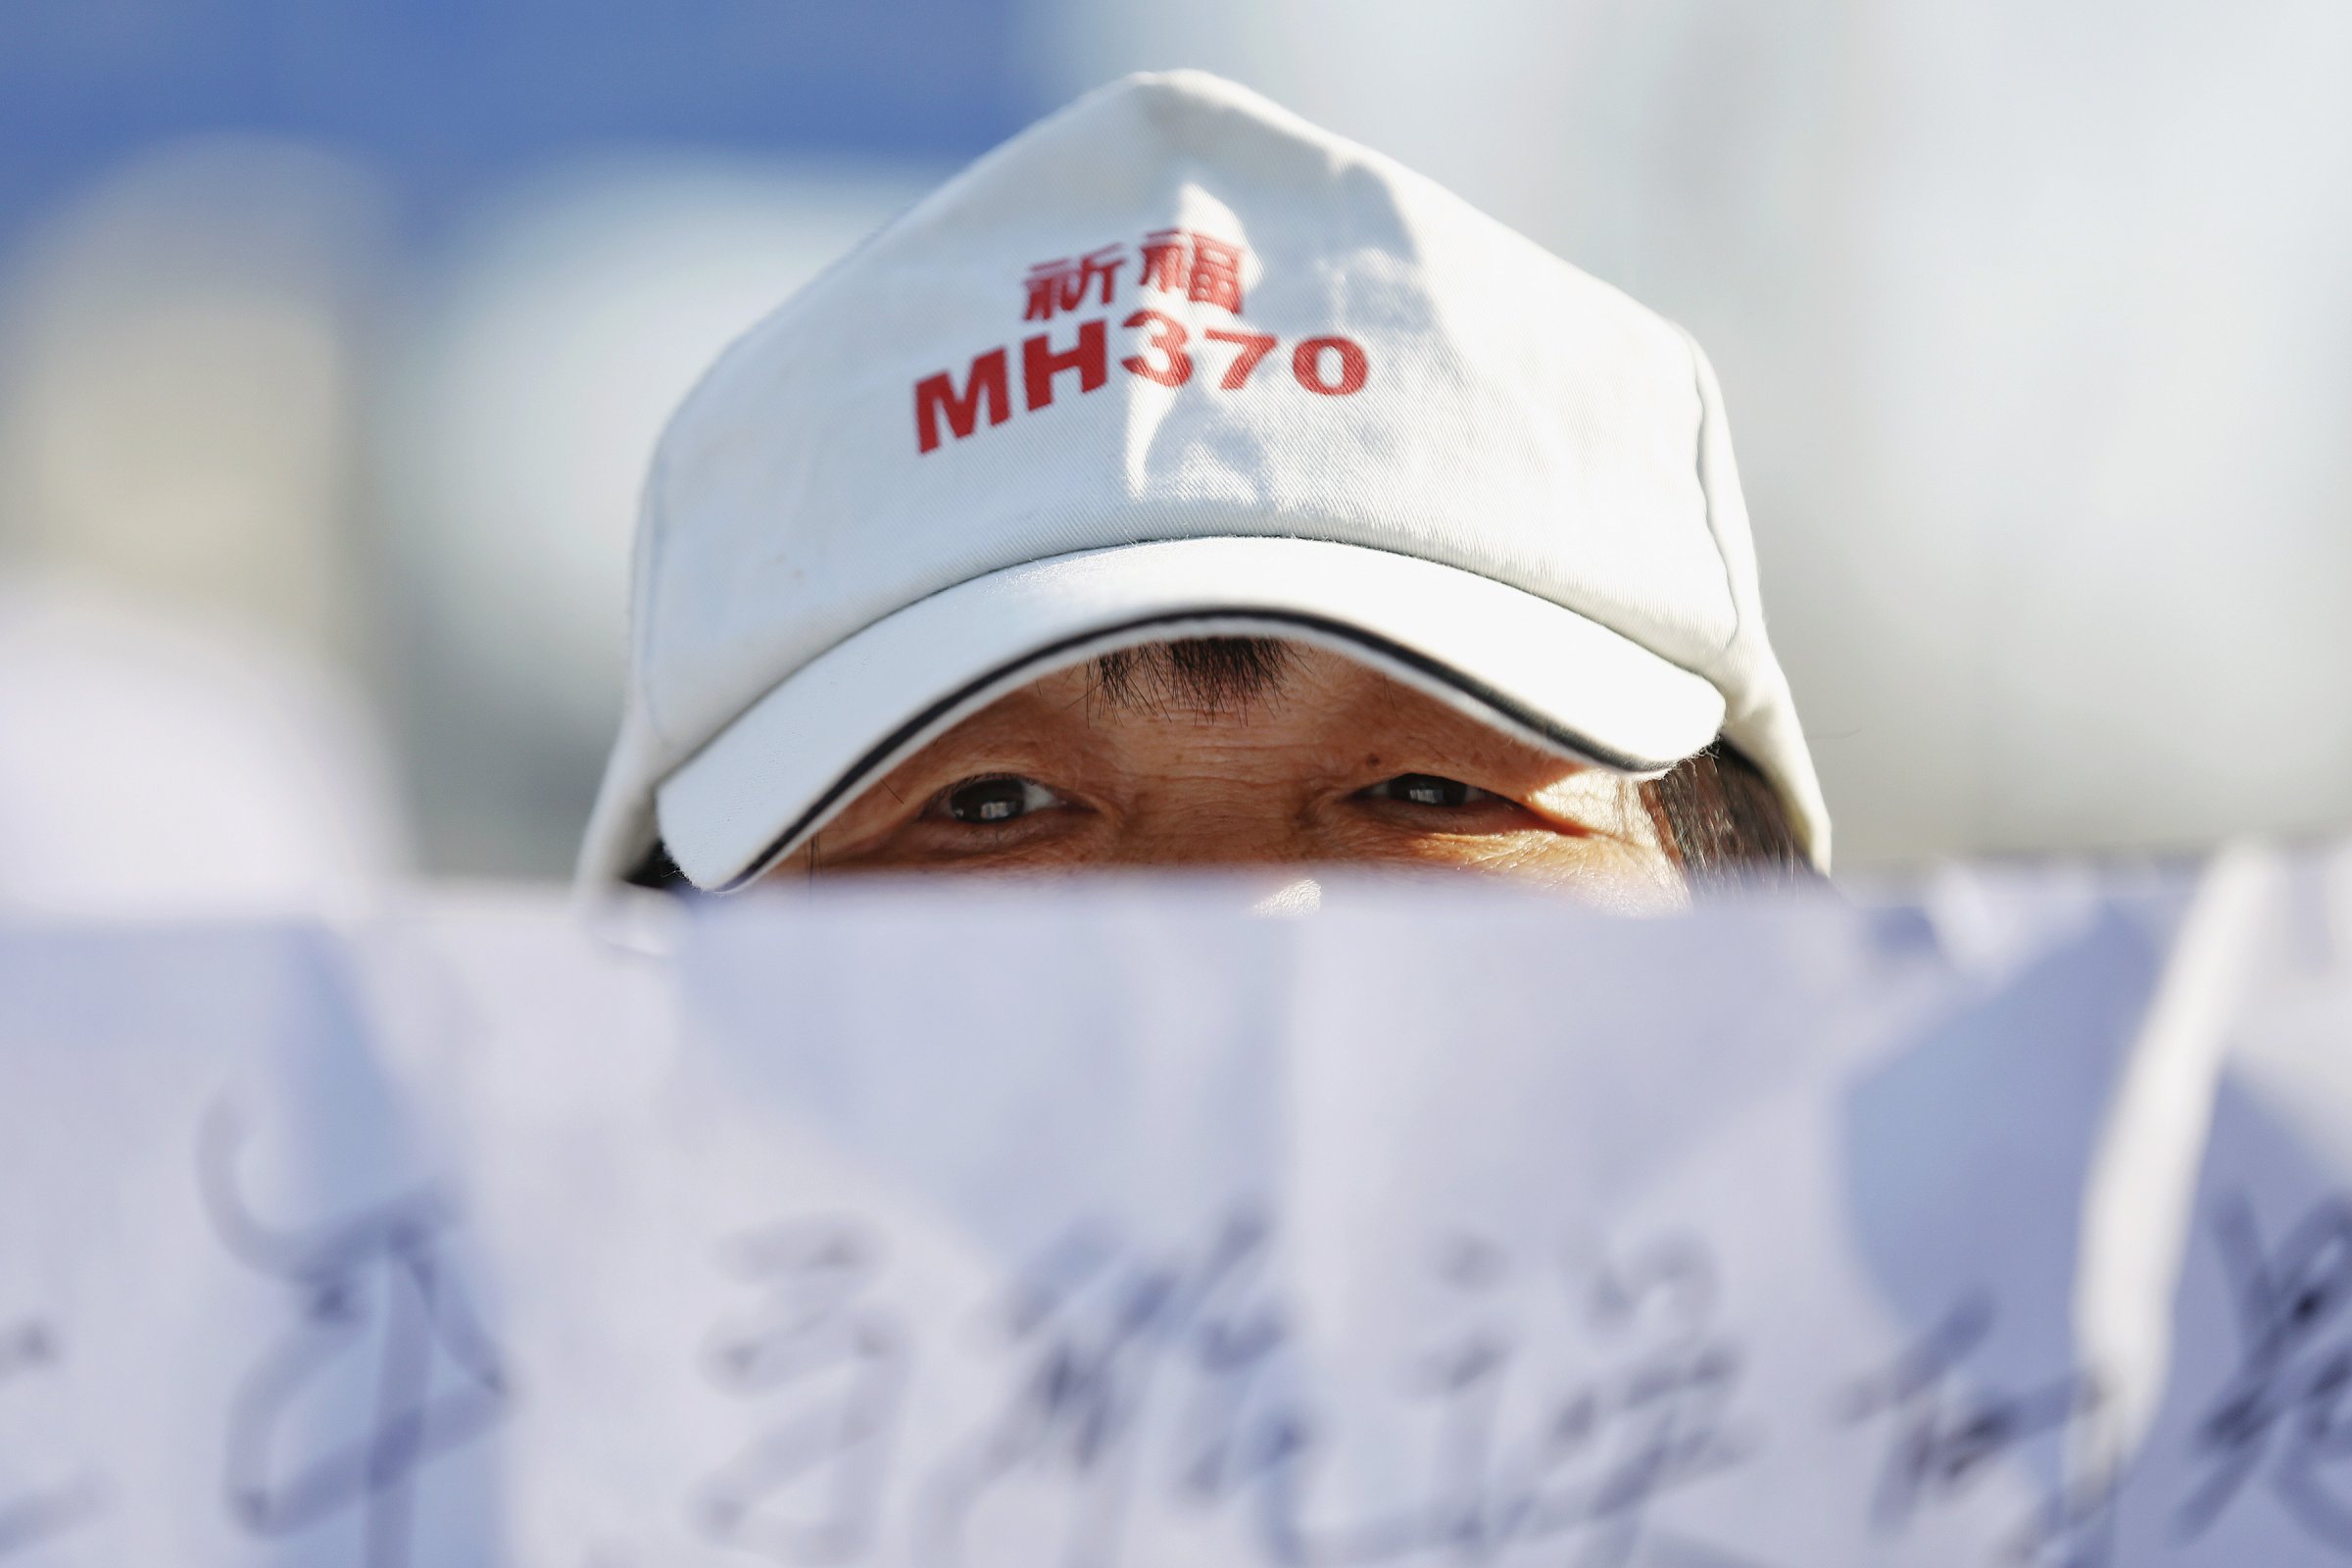 A family member of a passenger onboard Malaysia Airlines flight MH370 which went missing in 2014 holds a banner during a gathering in front of the Malaysian Embassy on the second anniversary of the disappearance of MH370, in Beijing